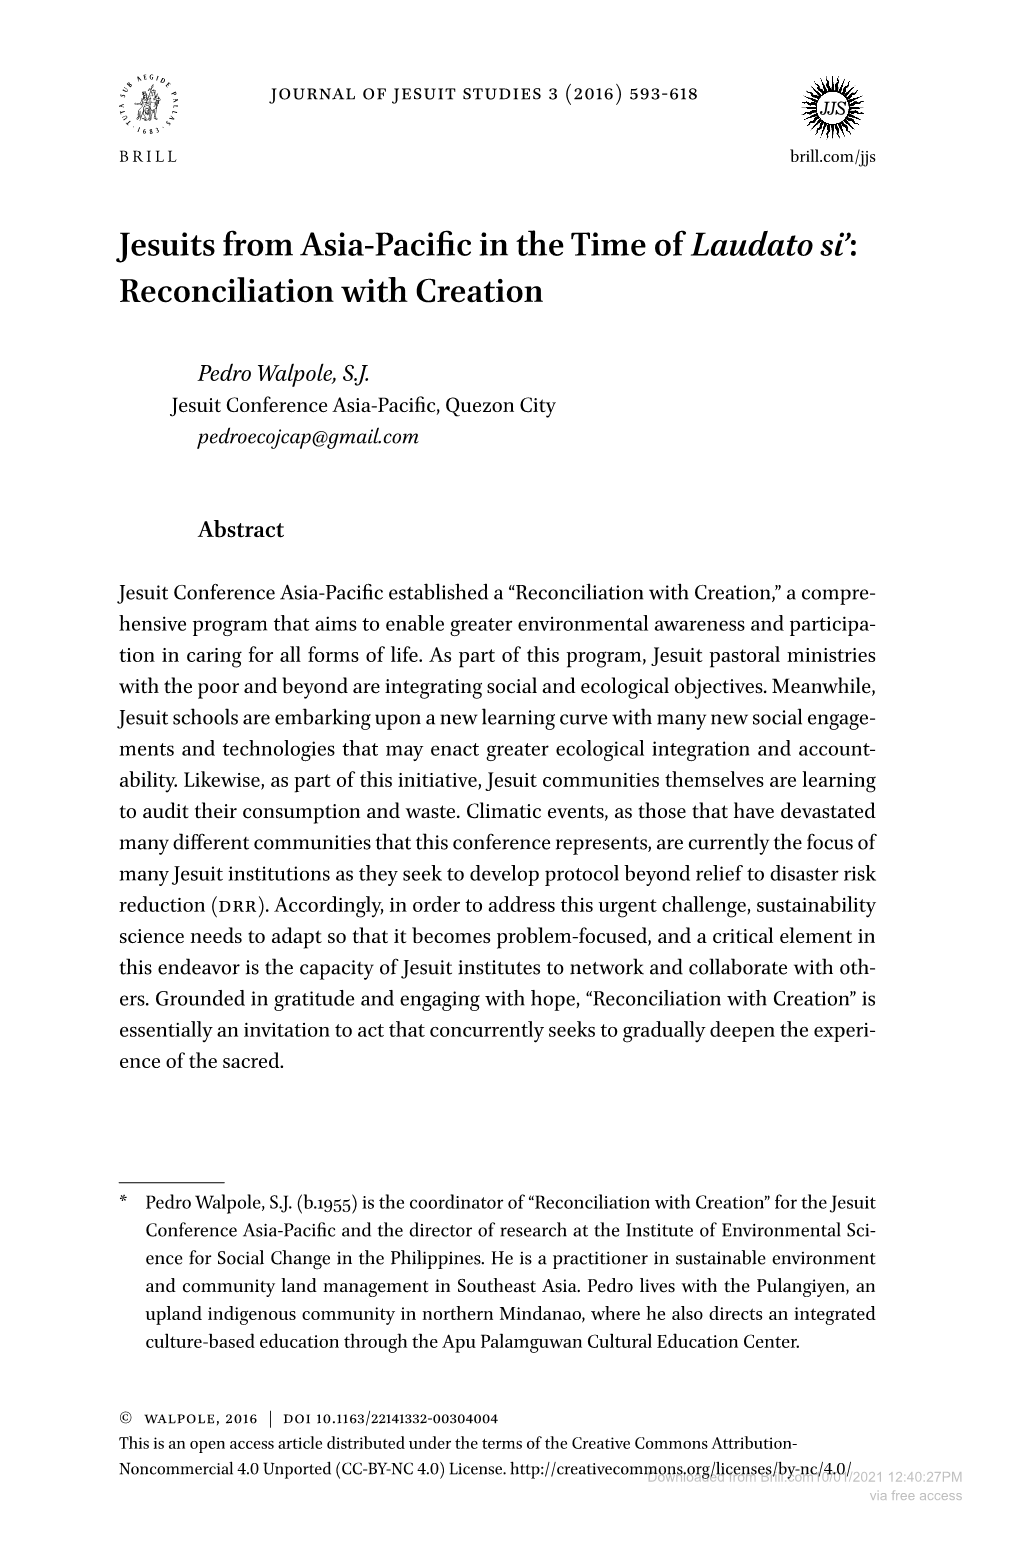 Jesuits from Asia-Pacific in the Time of Laudato Si’: Reconciliation with Creation